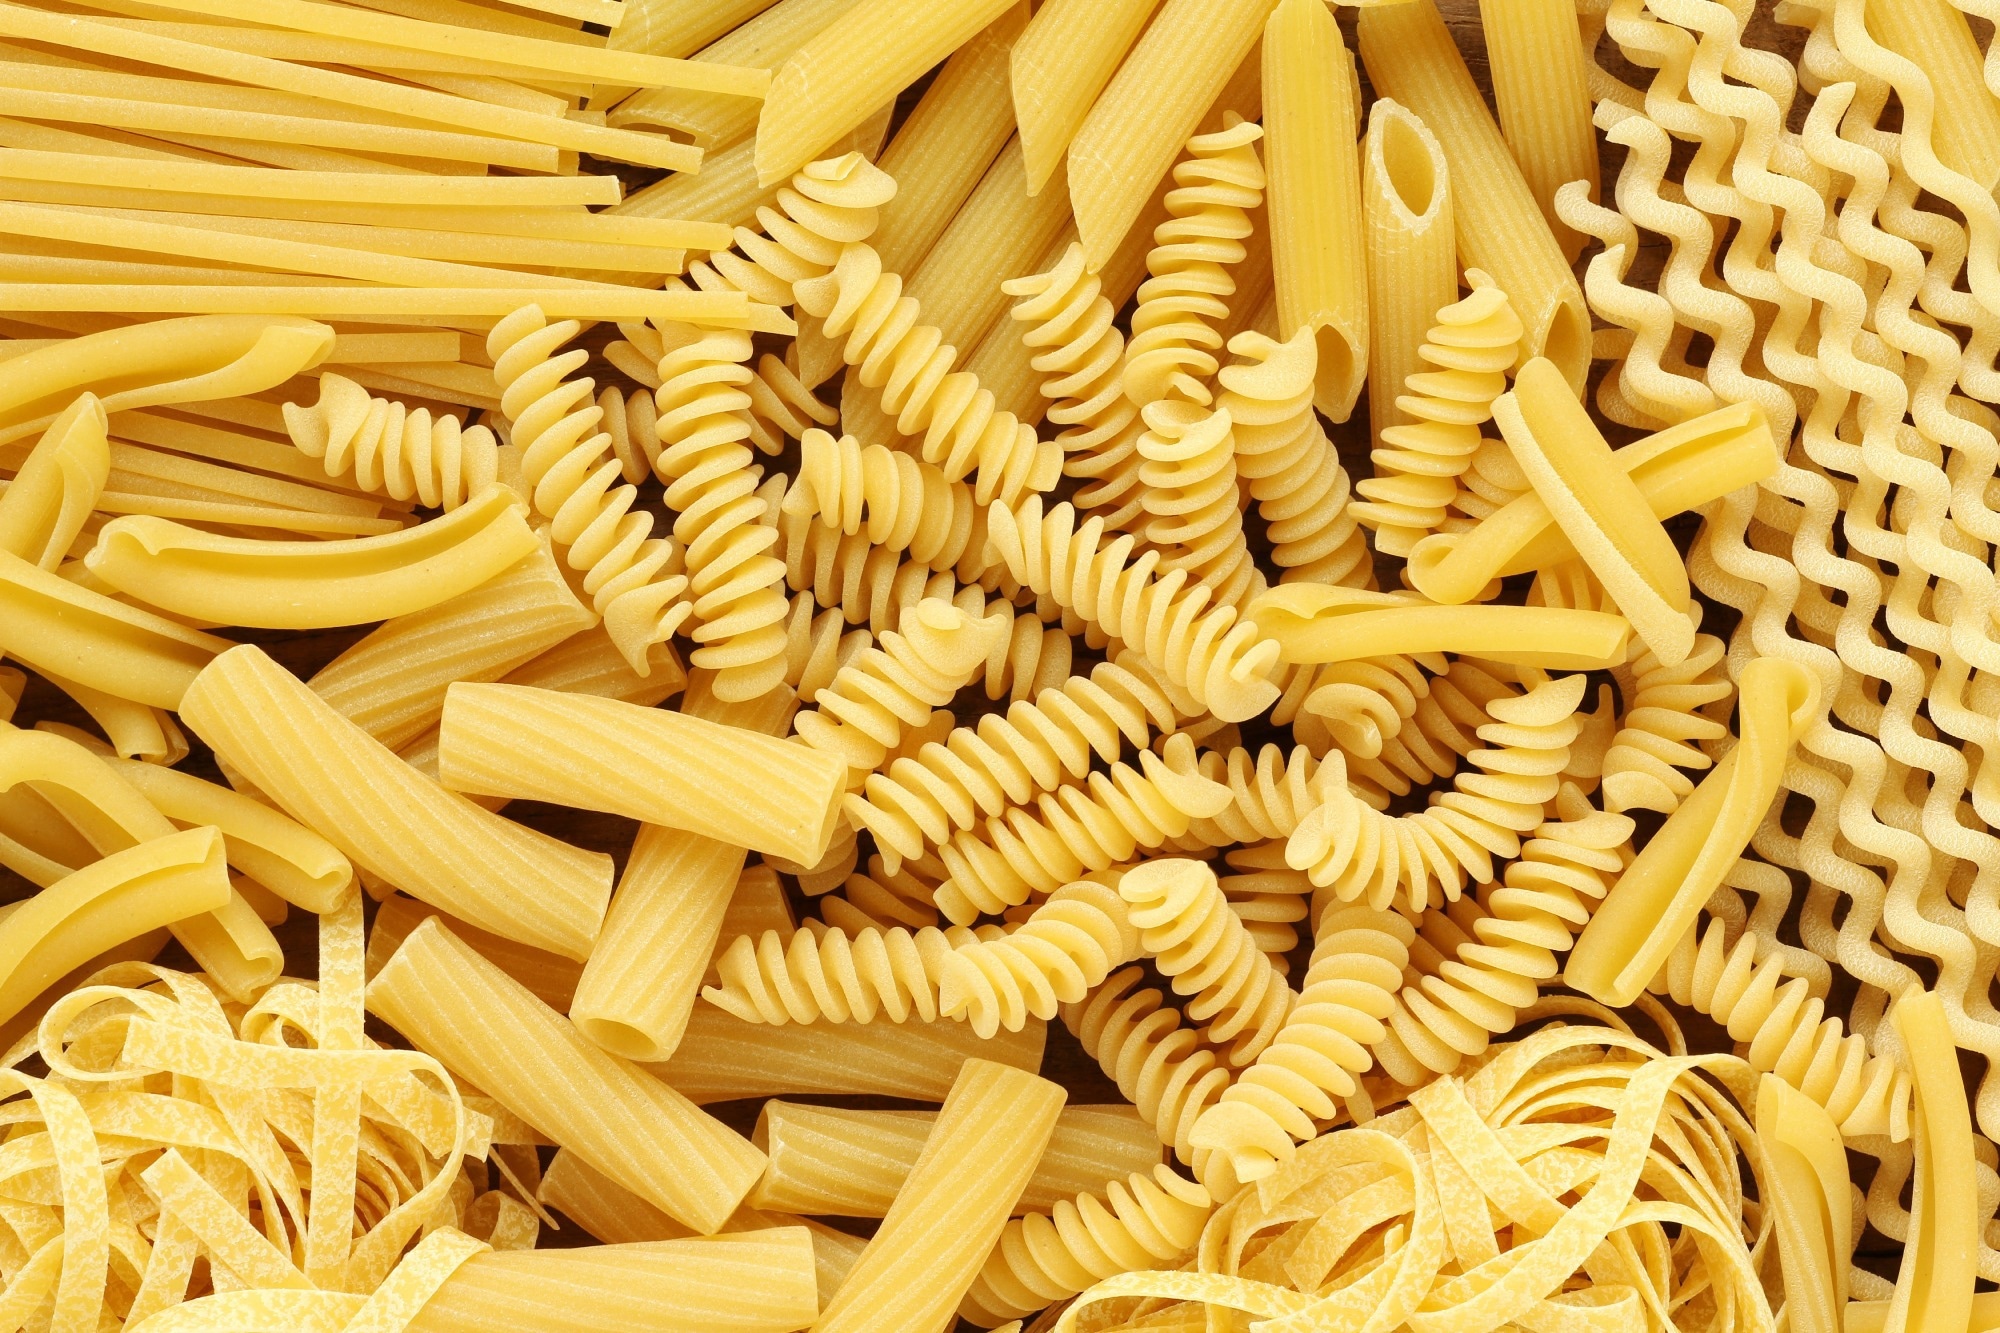 Study: Impact of Pasta Intake on Body Weight and Body Composition: A Technical Review. Image Credit: kuvona/Shutterstock.com